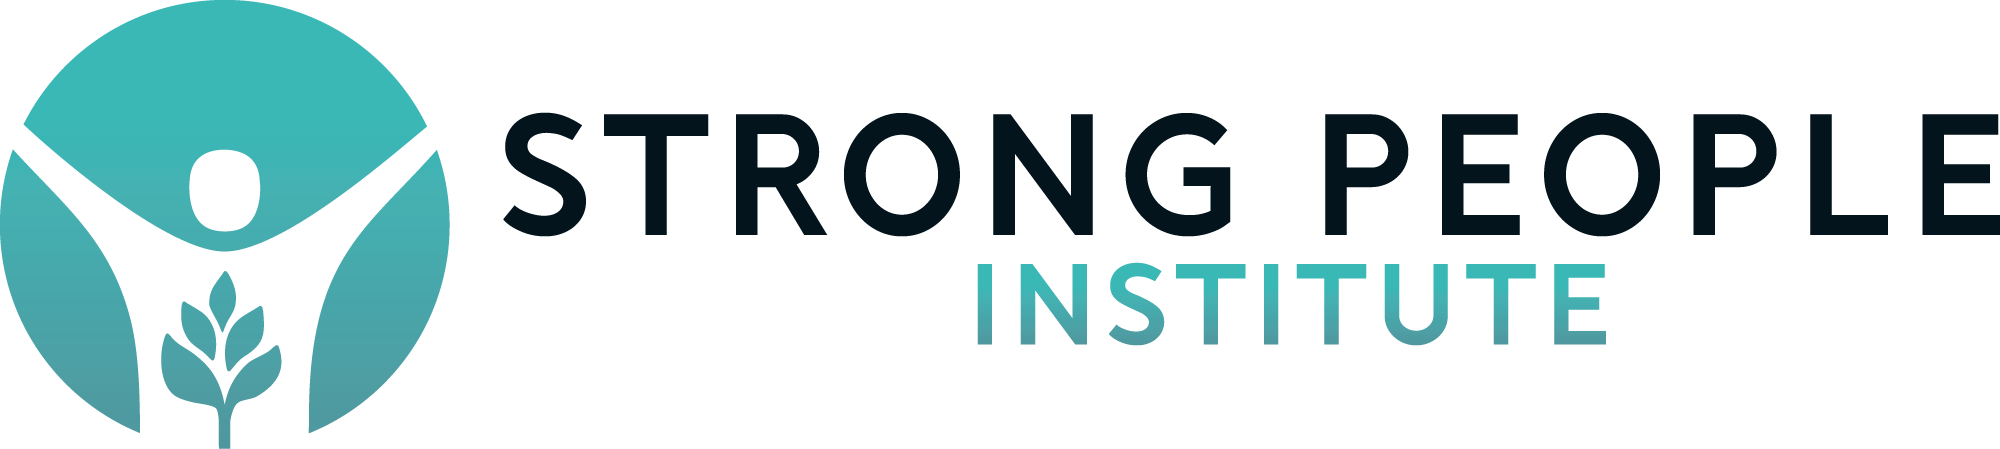 Mindful Courses by Strong People Institute